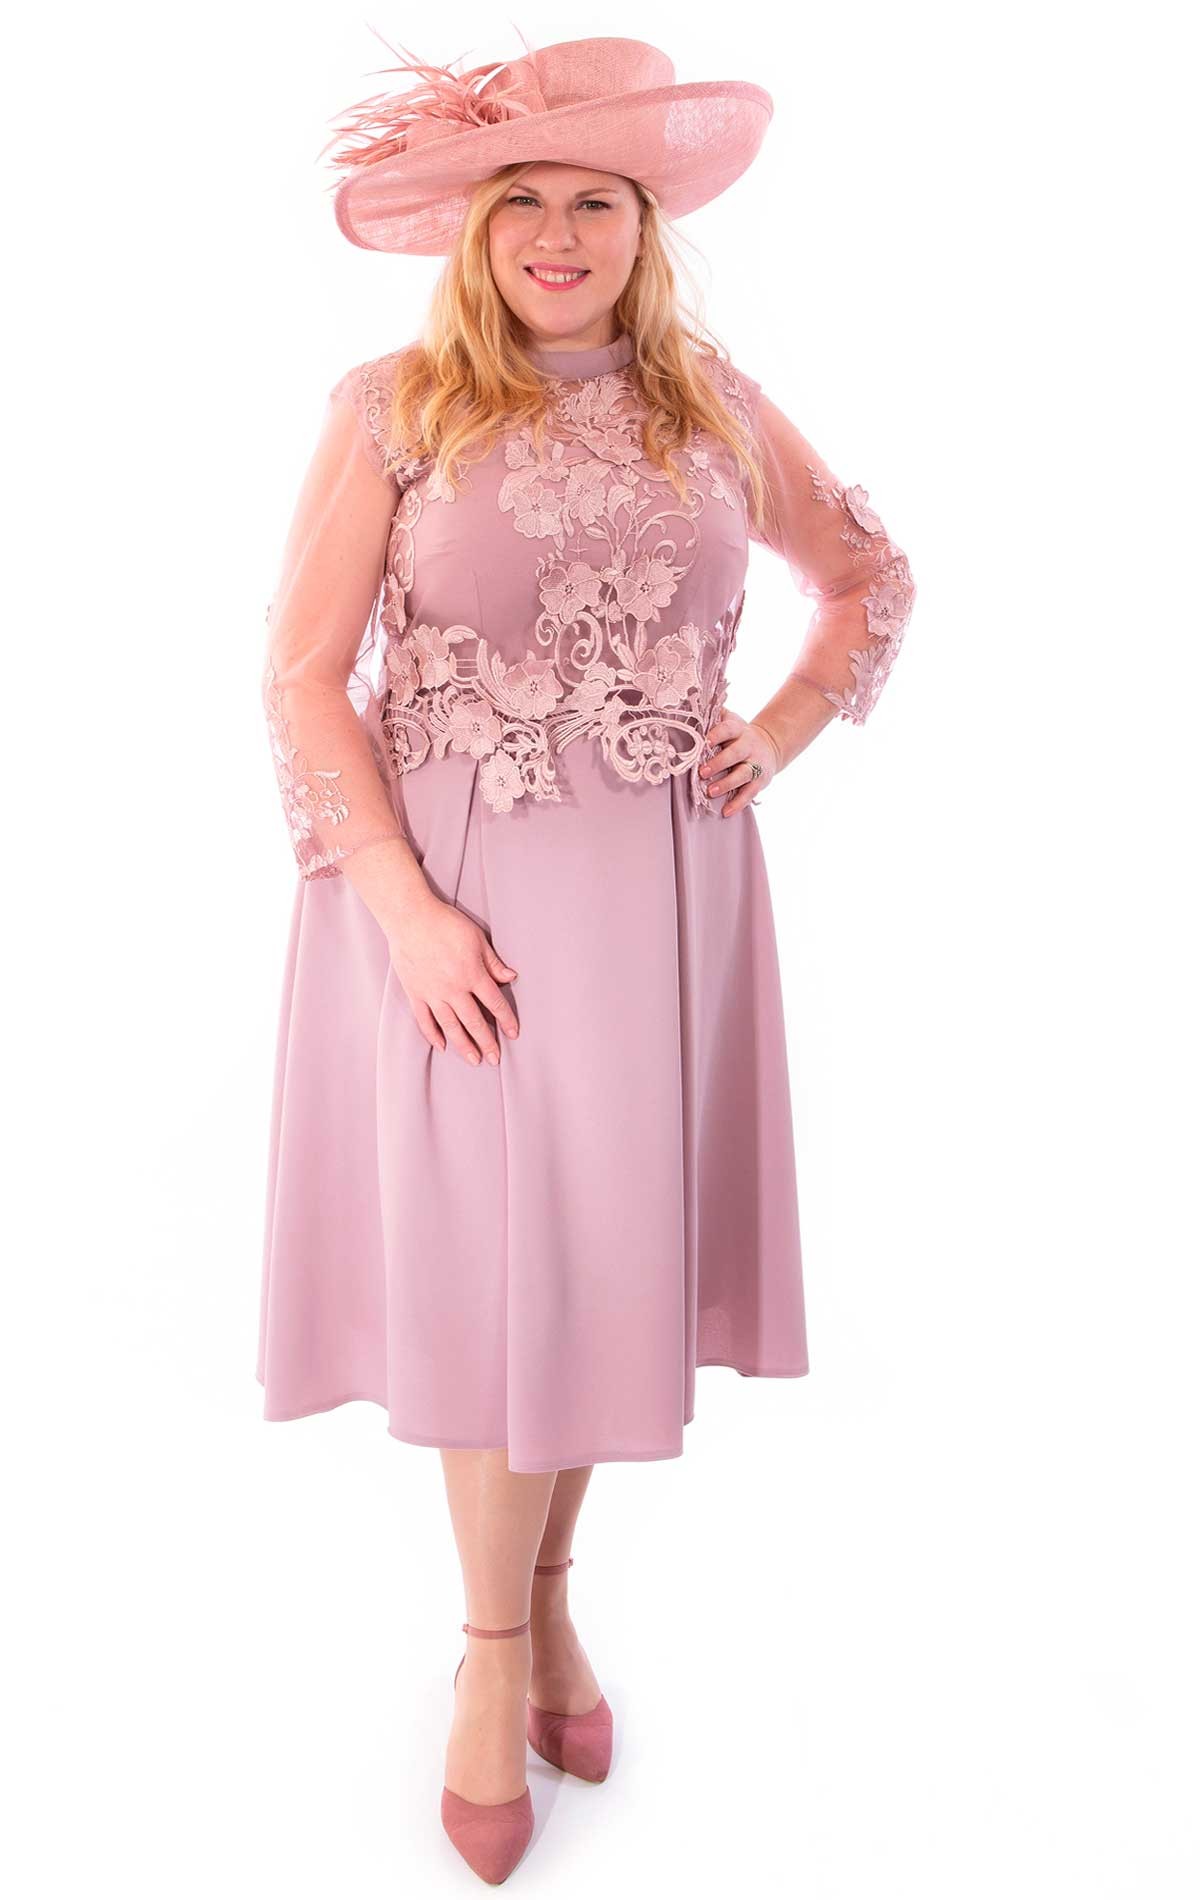 Valentine - Valentine -Plus Size Ladies Occasion Dress by Penguin Designs - Special Occasion Wear for Plus Size Mothers of the Bride & Mothers of the Groom at Blessings Occasions Shop, 1 Loyal Parade, Mill Rise, Westdene, Brighton. E. Sussex BN1 5GG Telephone: 01273 505766